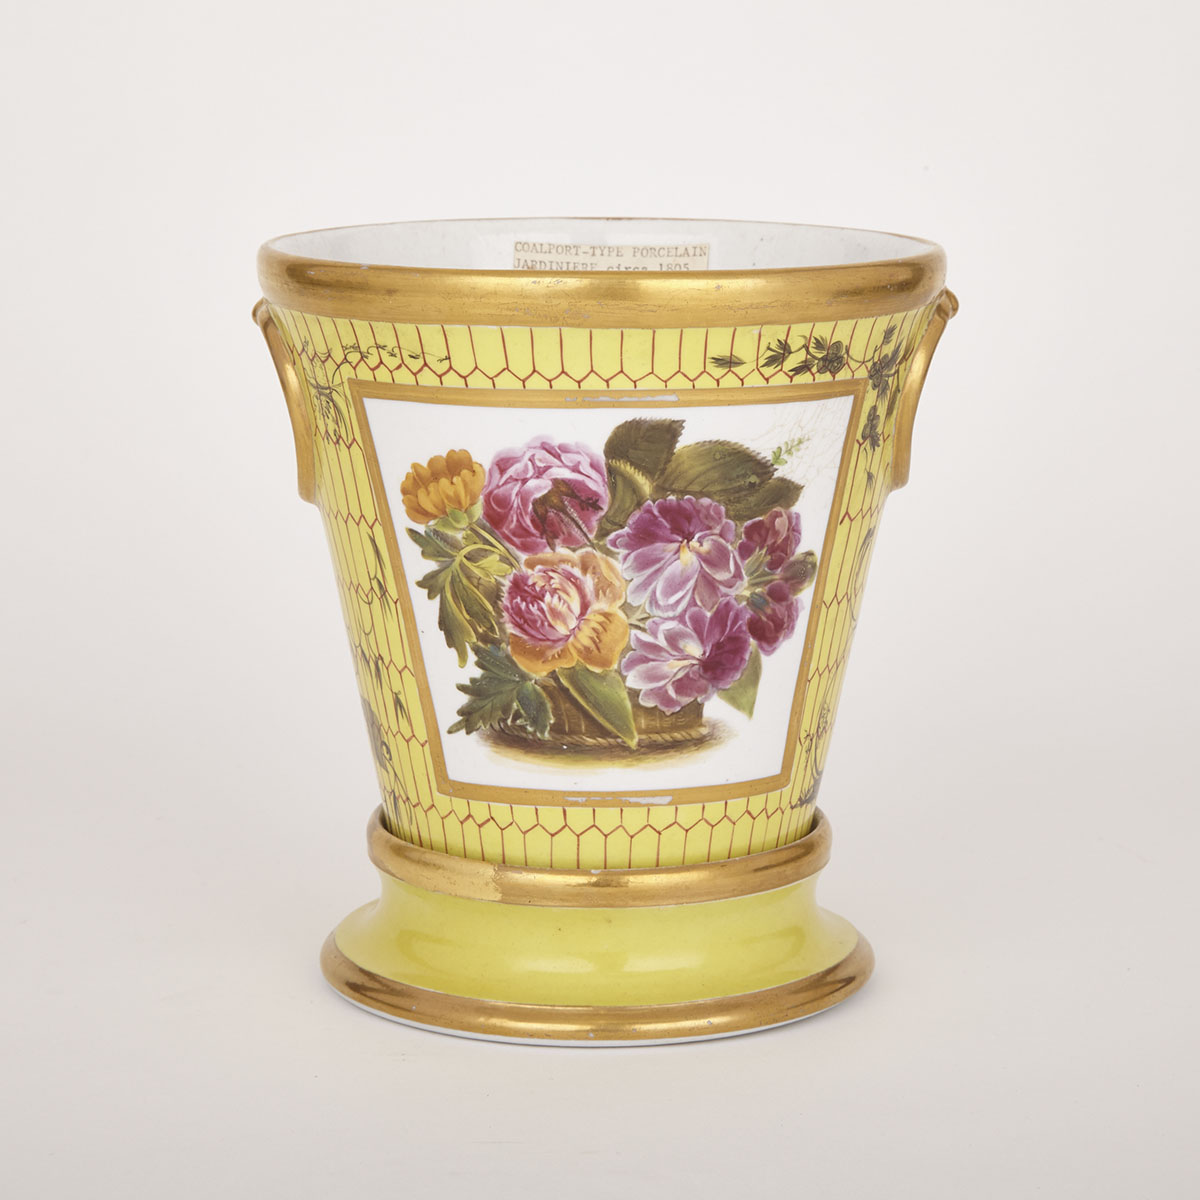 English Porcelain Yellow-Ground Cachepot and Stand, c.1805-10